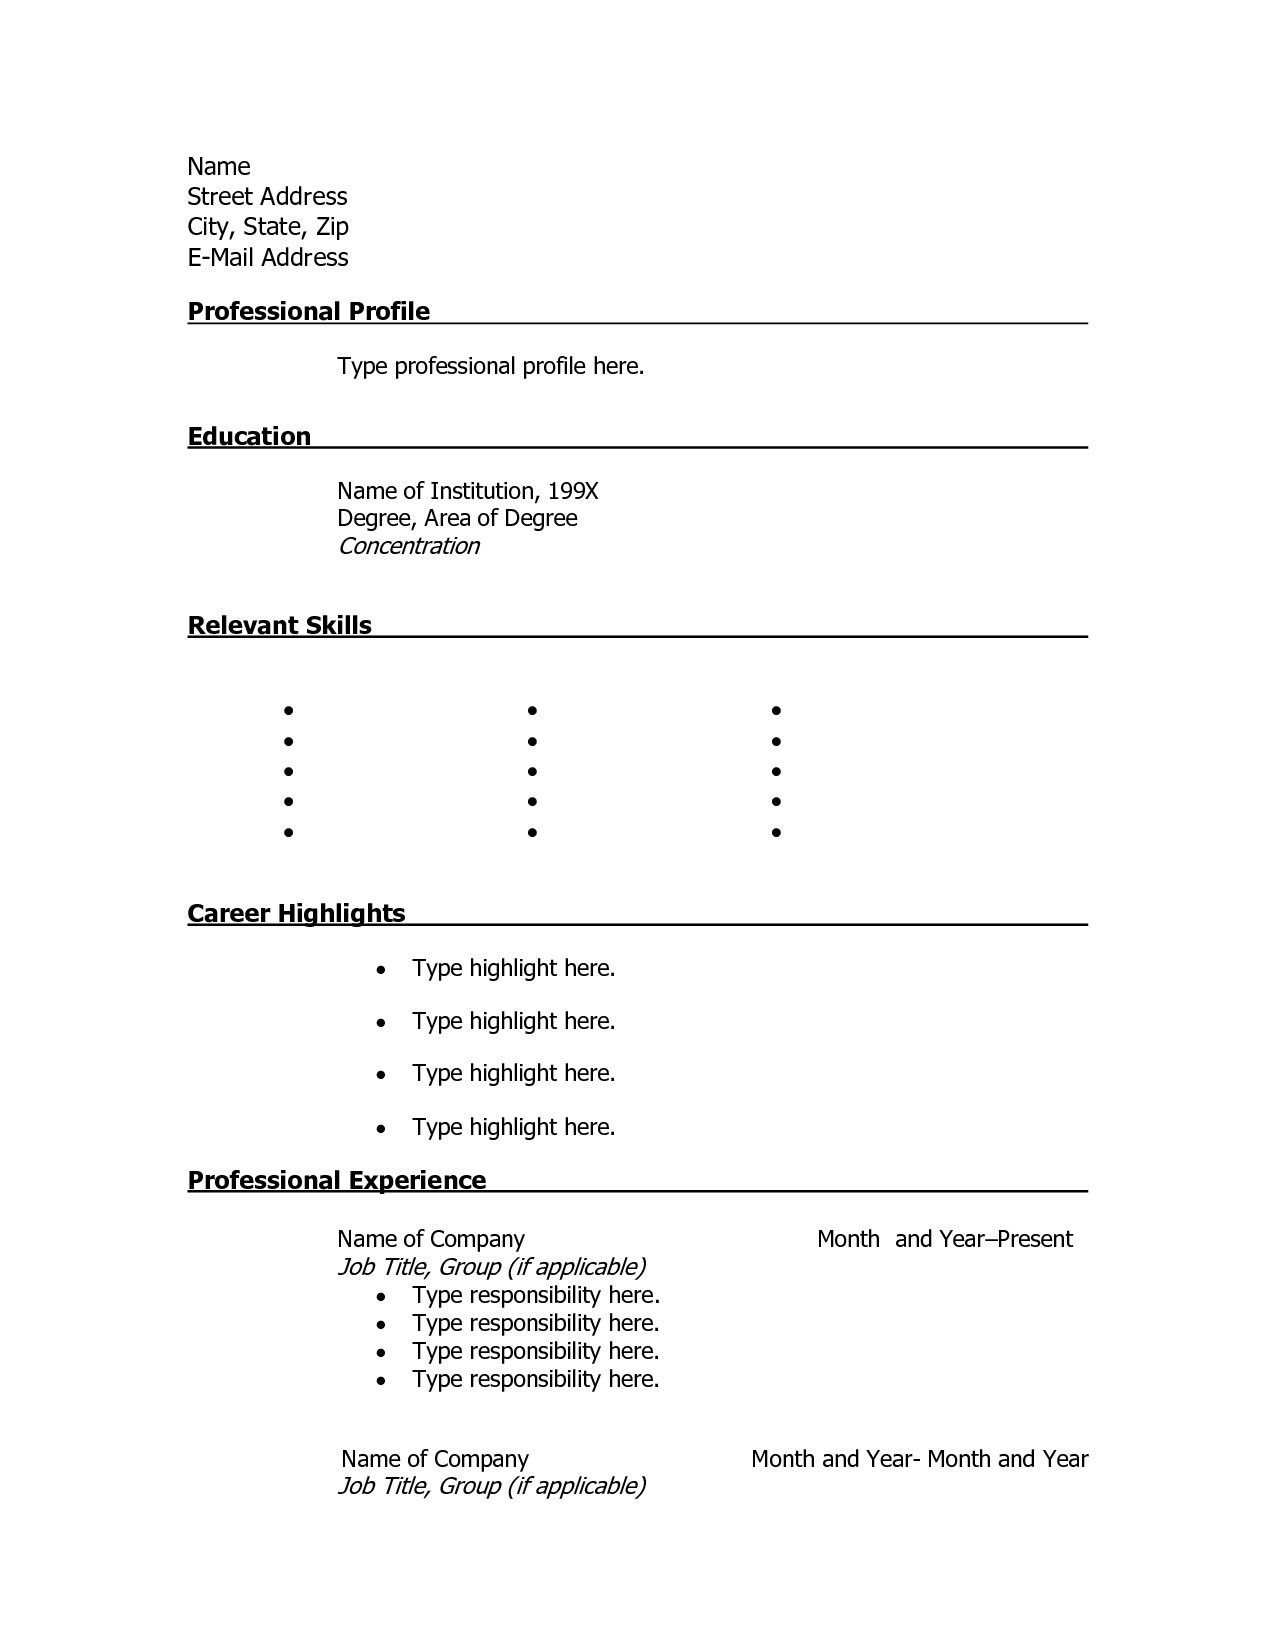 Resume Template For High School Students Free Printable Resume - Free Printable Resume Templates